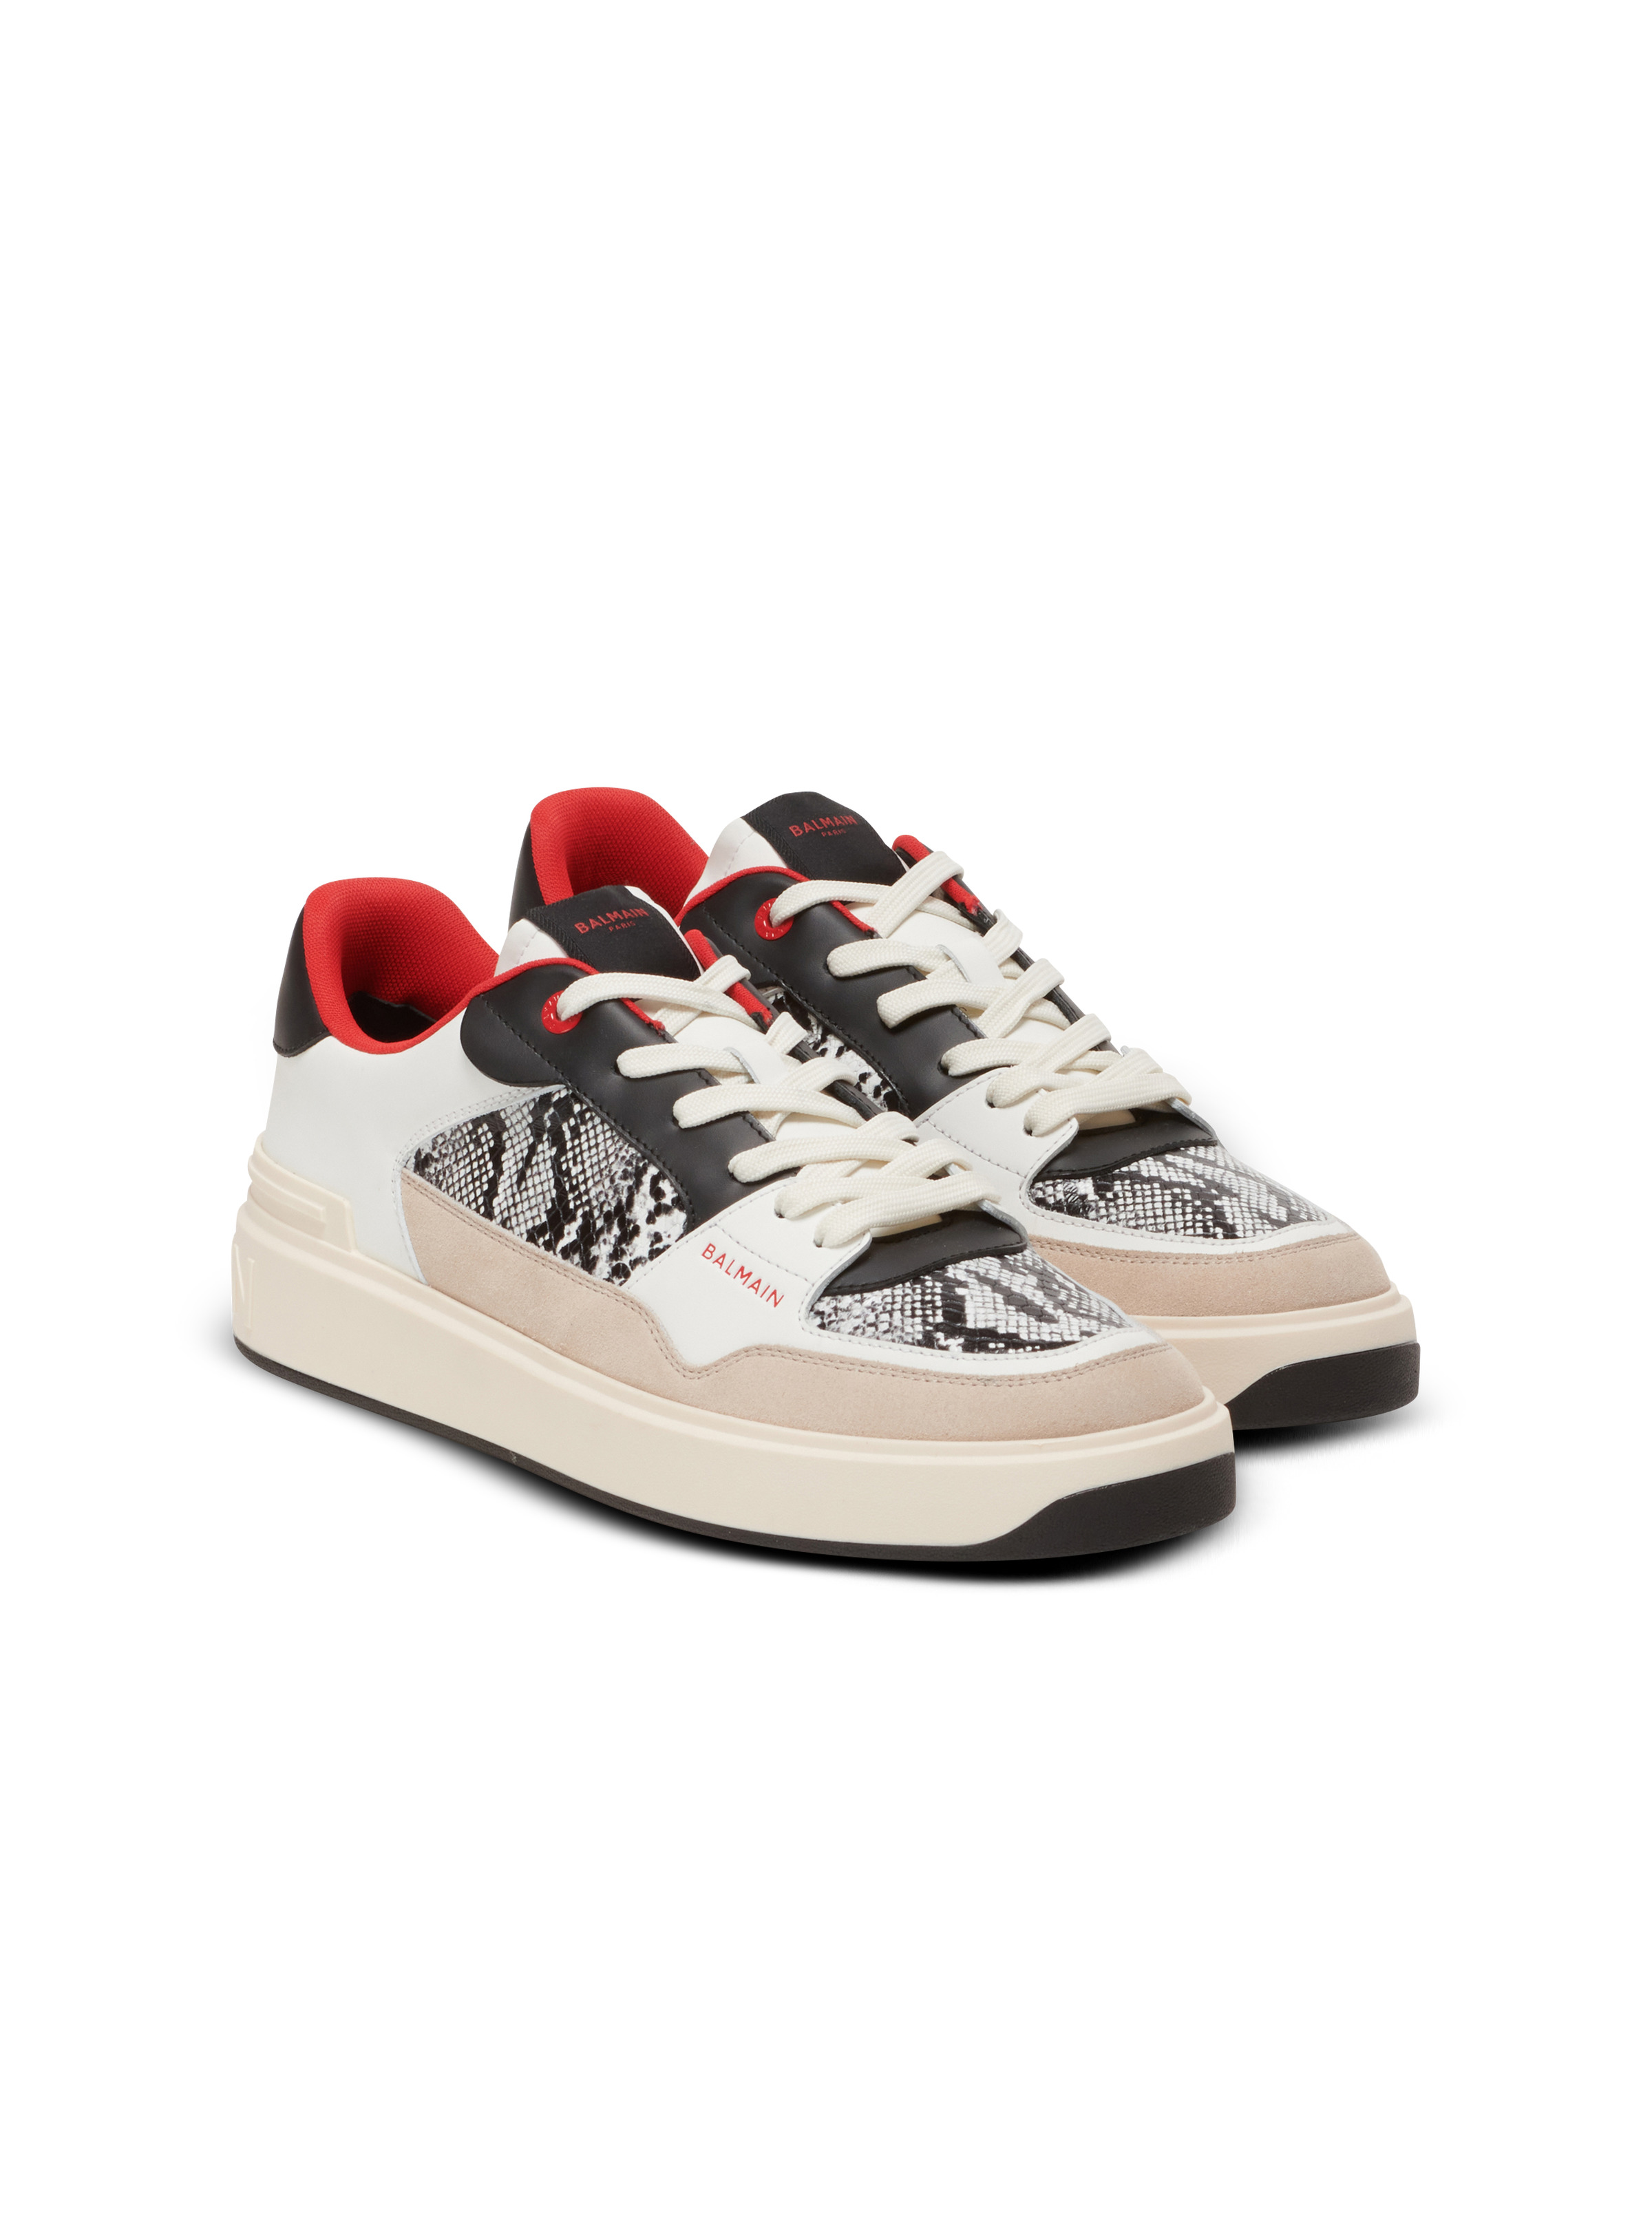 B-Court Flip snakeskin-effect leather and suede trainers - 2